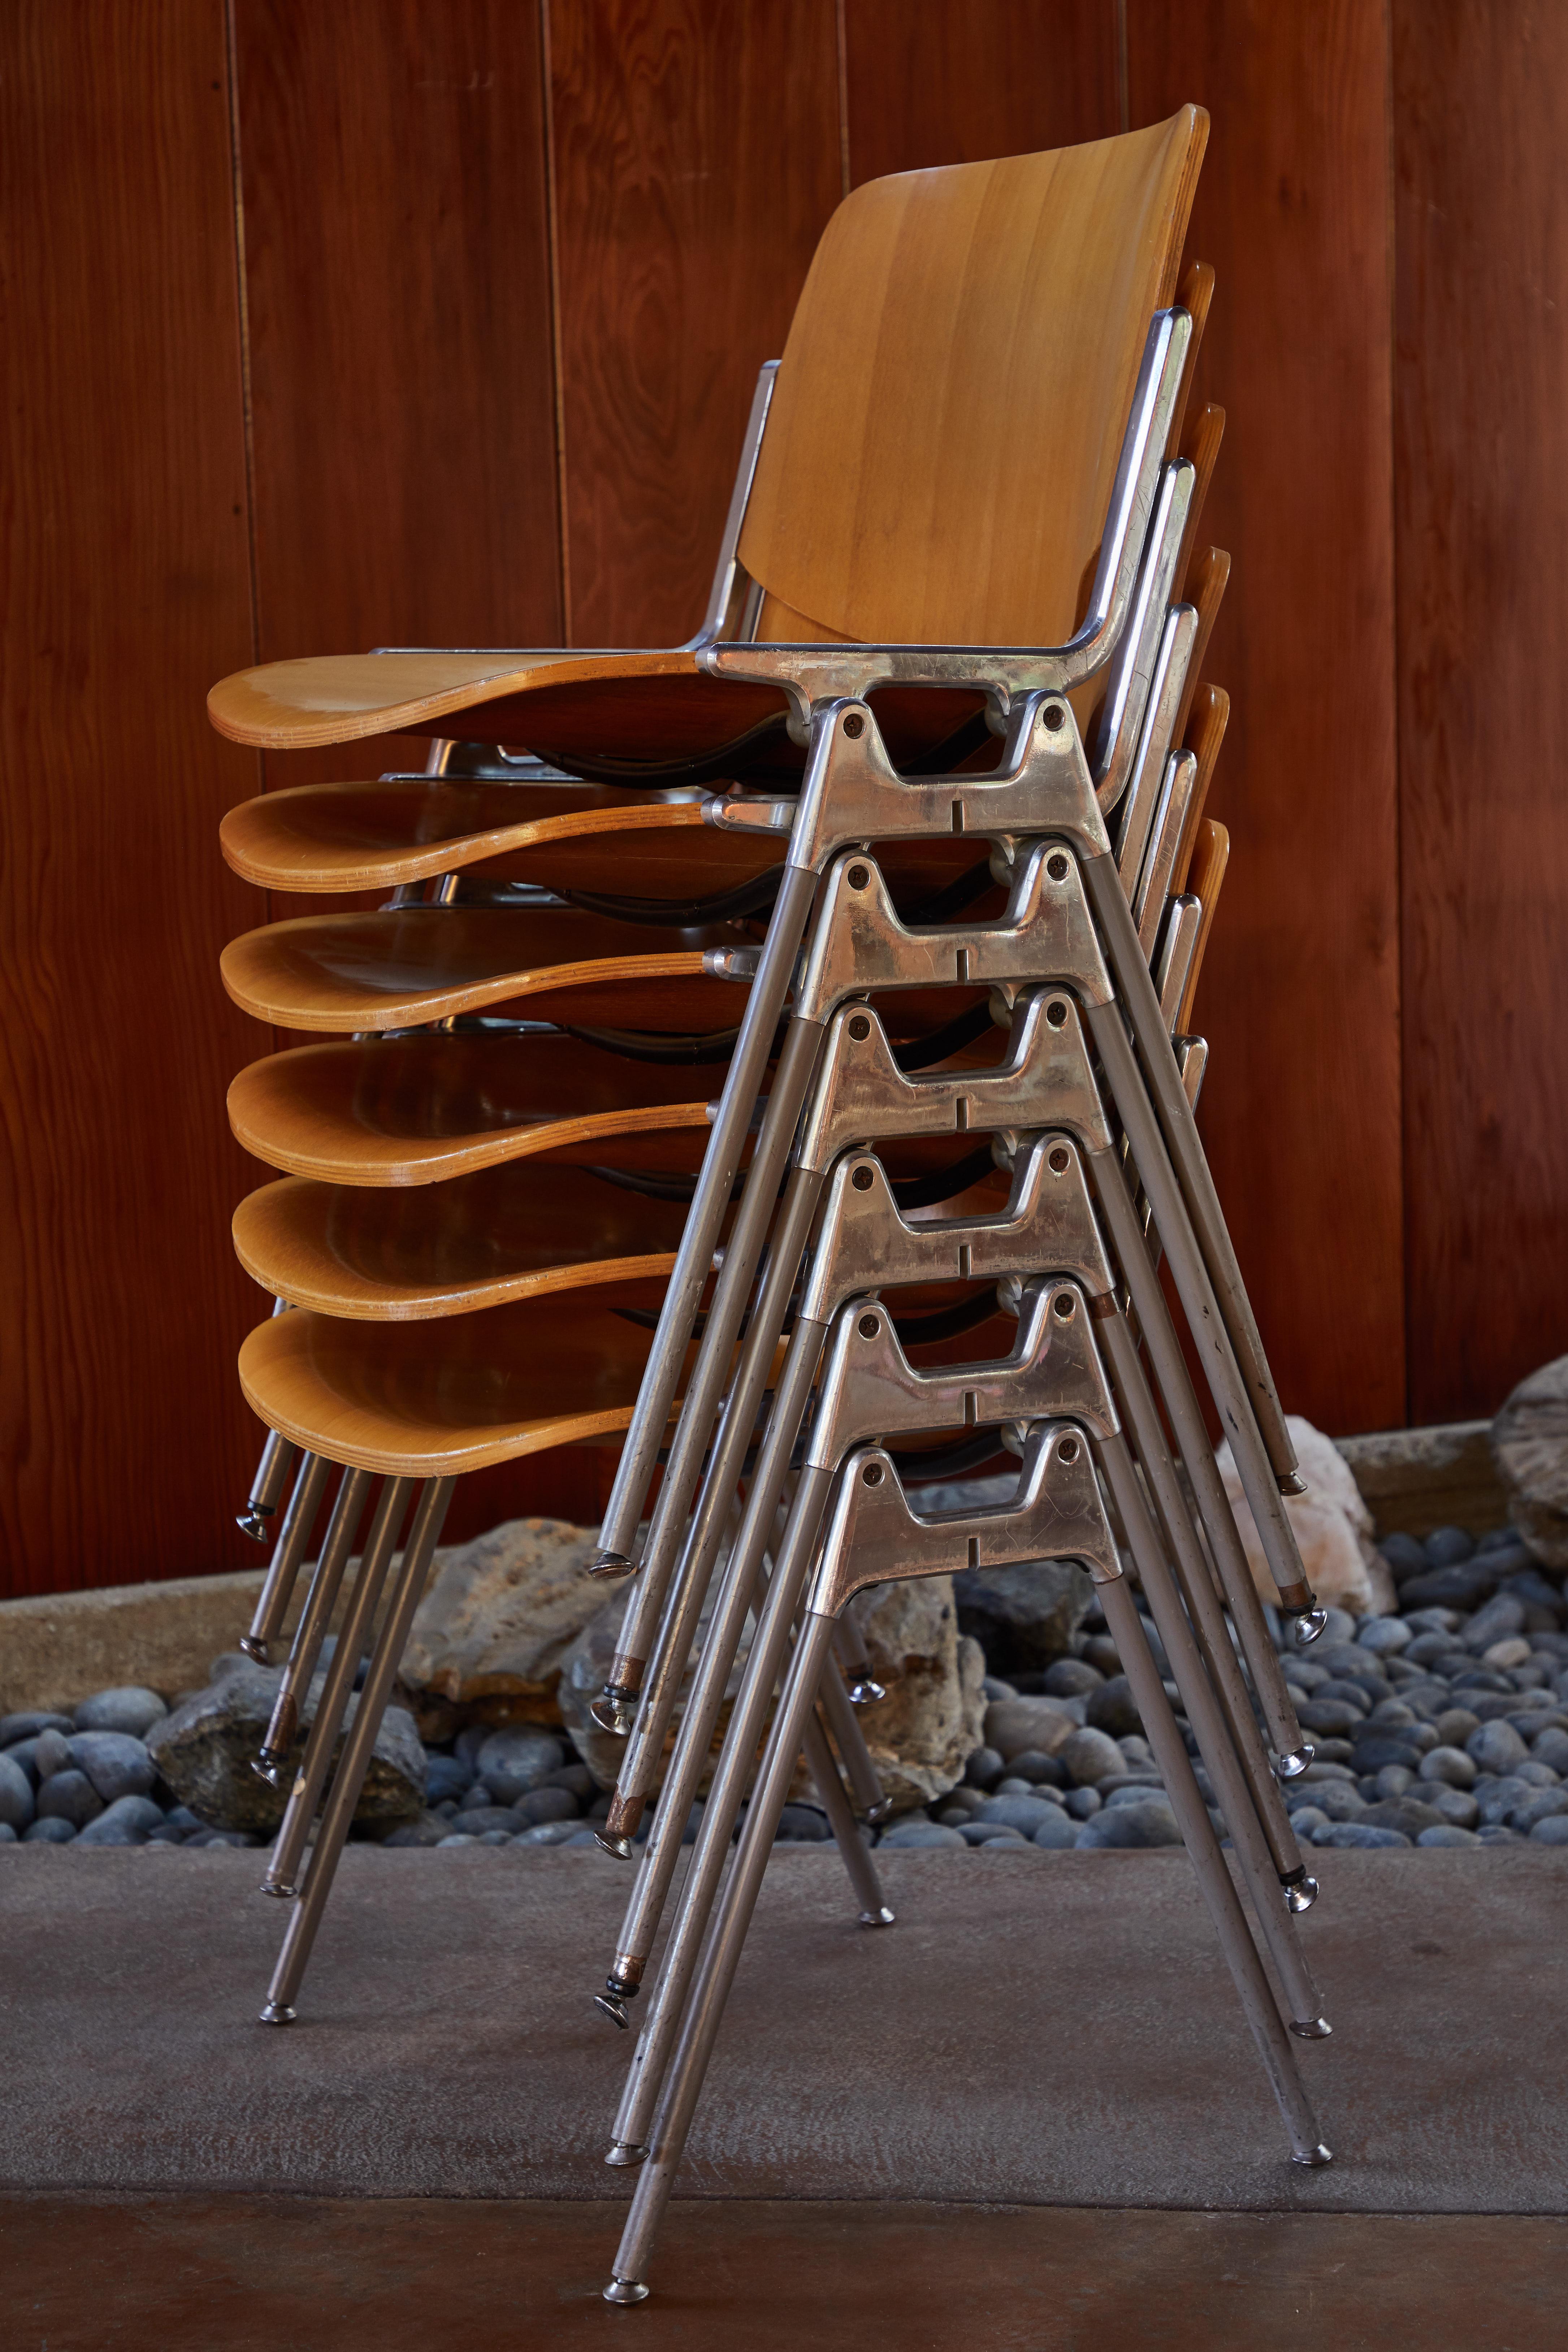 1960s Giancarlo Piretti Stackable chairs for Castelli. Executed in polished aluminum and wood. A quintessentially 1960s Italian design showcasing the highest level of refinement, materials and craftsmanship.

Price is for the set of 6